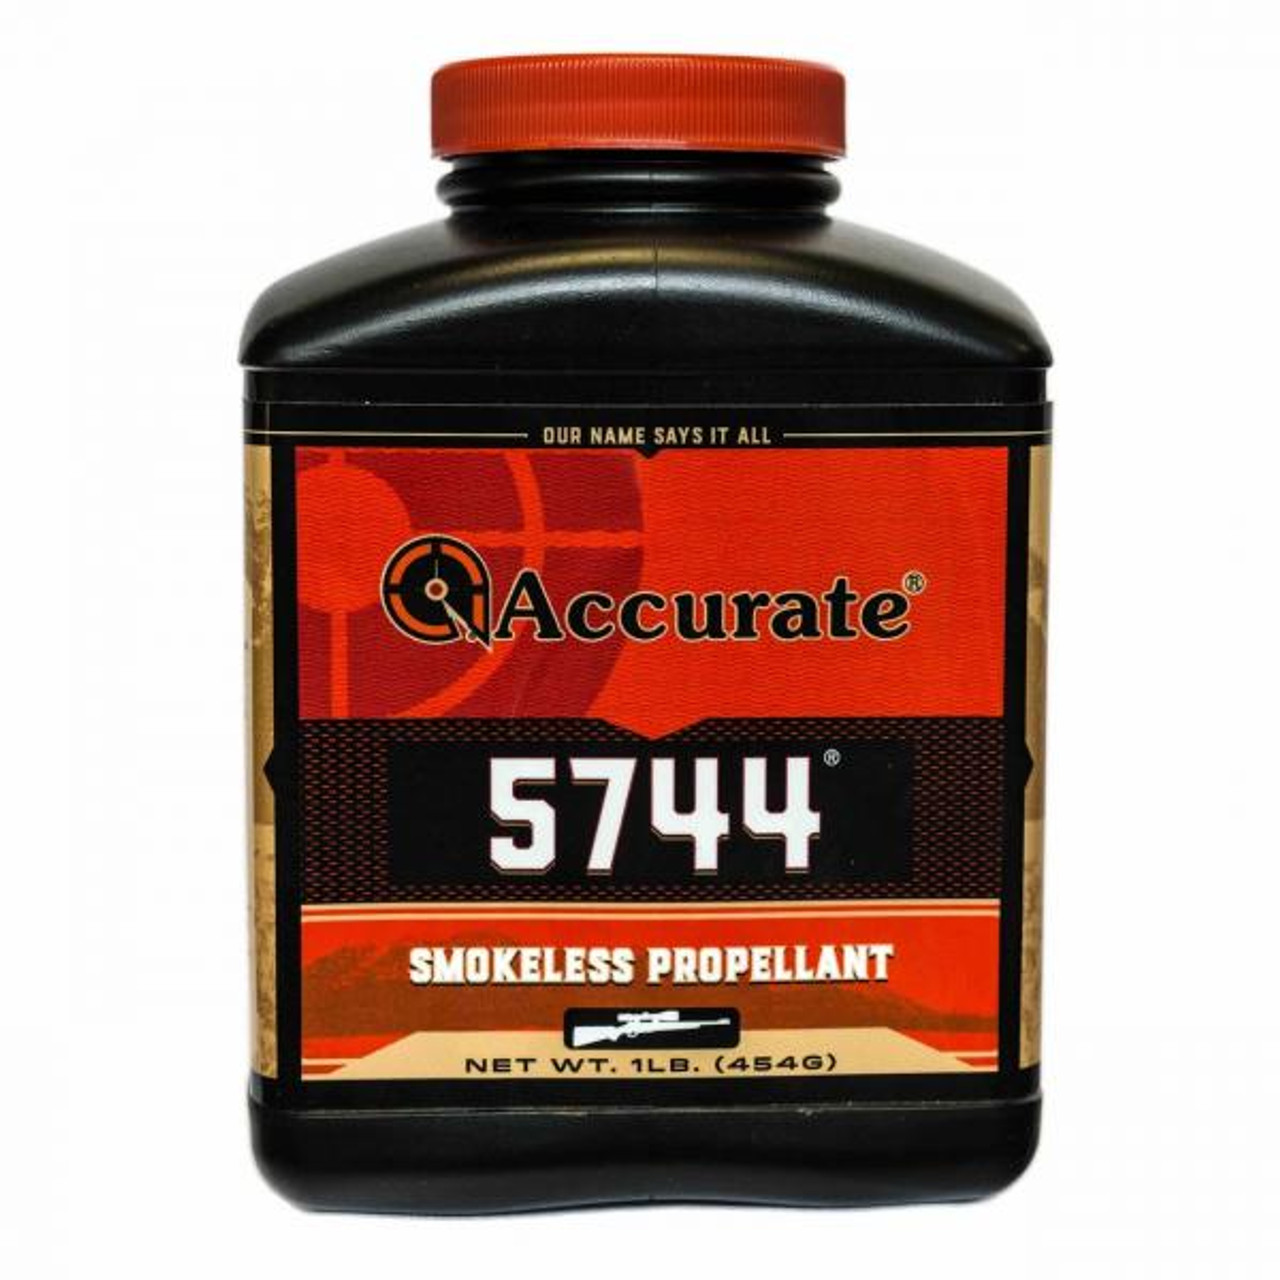 Accurate 5744 is an extremely fast burning, double-base, extruded powder. This unique powder can be used in a wide range of rifle calibers and magnum handguns. 5744 is characterized by excellent ignition and consistency over a very wide performance range. Low bulky density and superior ignition characteristics make 5744 an excellent choice for reduced loads in many rifle calibers and in large capacity black powder cartridges such as the 45-70 through 45-120 and 50-90 through 50-120. Made in Canada.